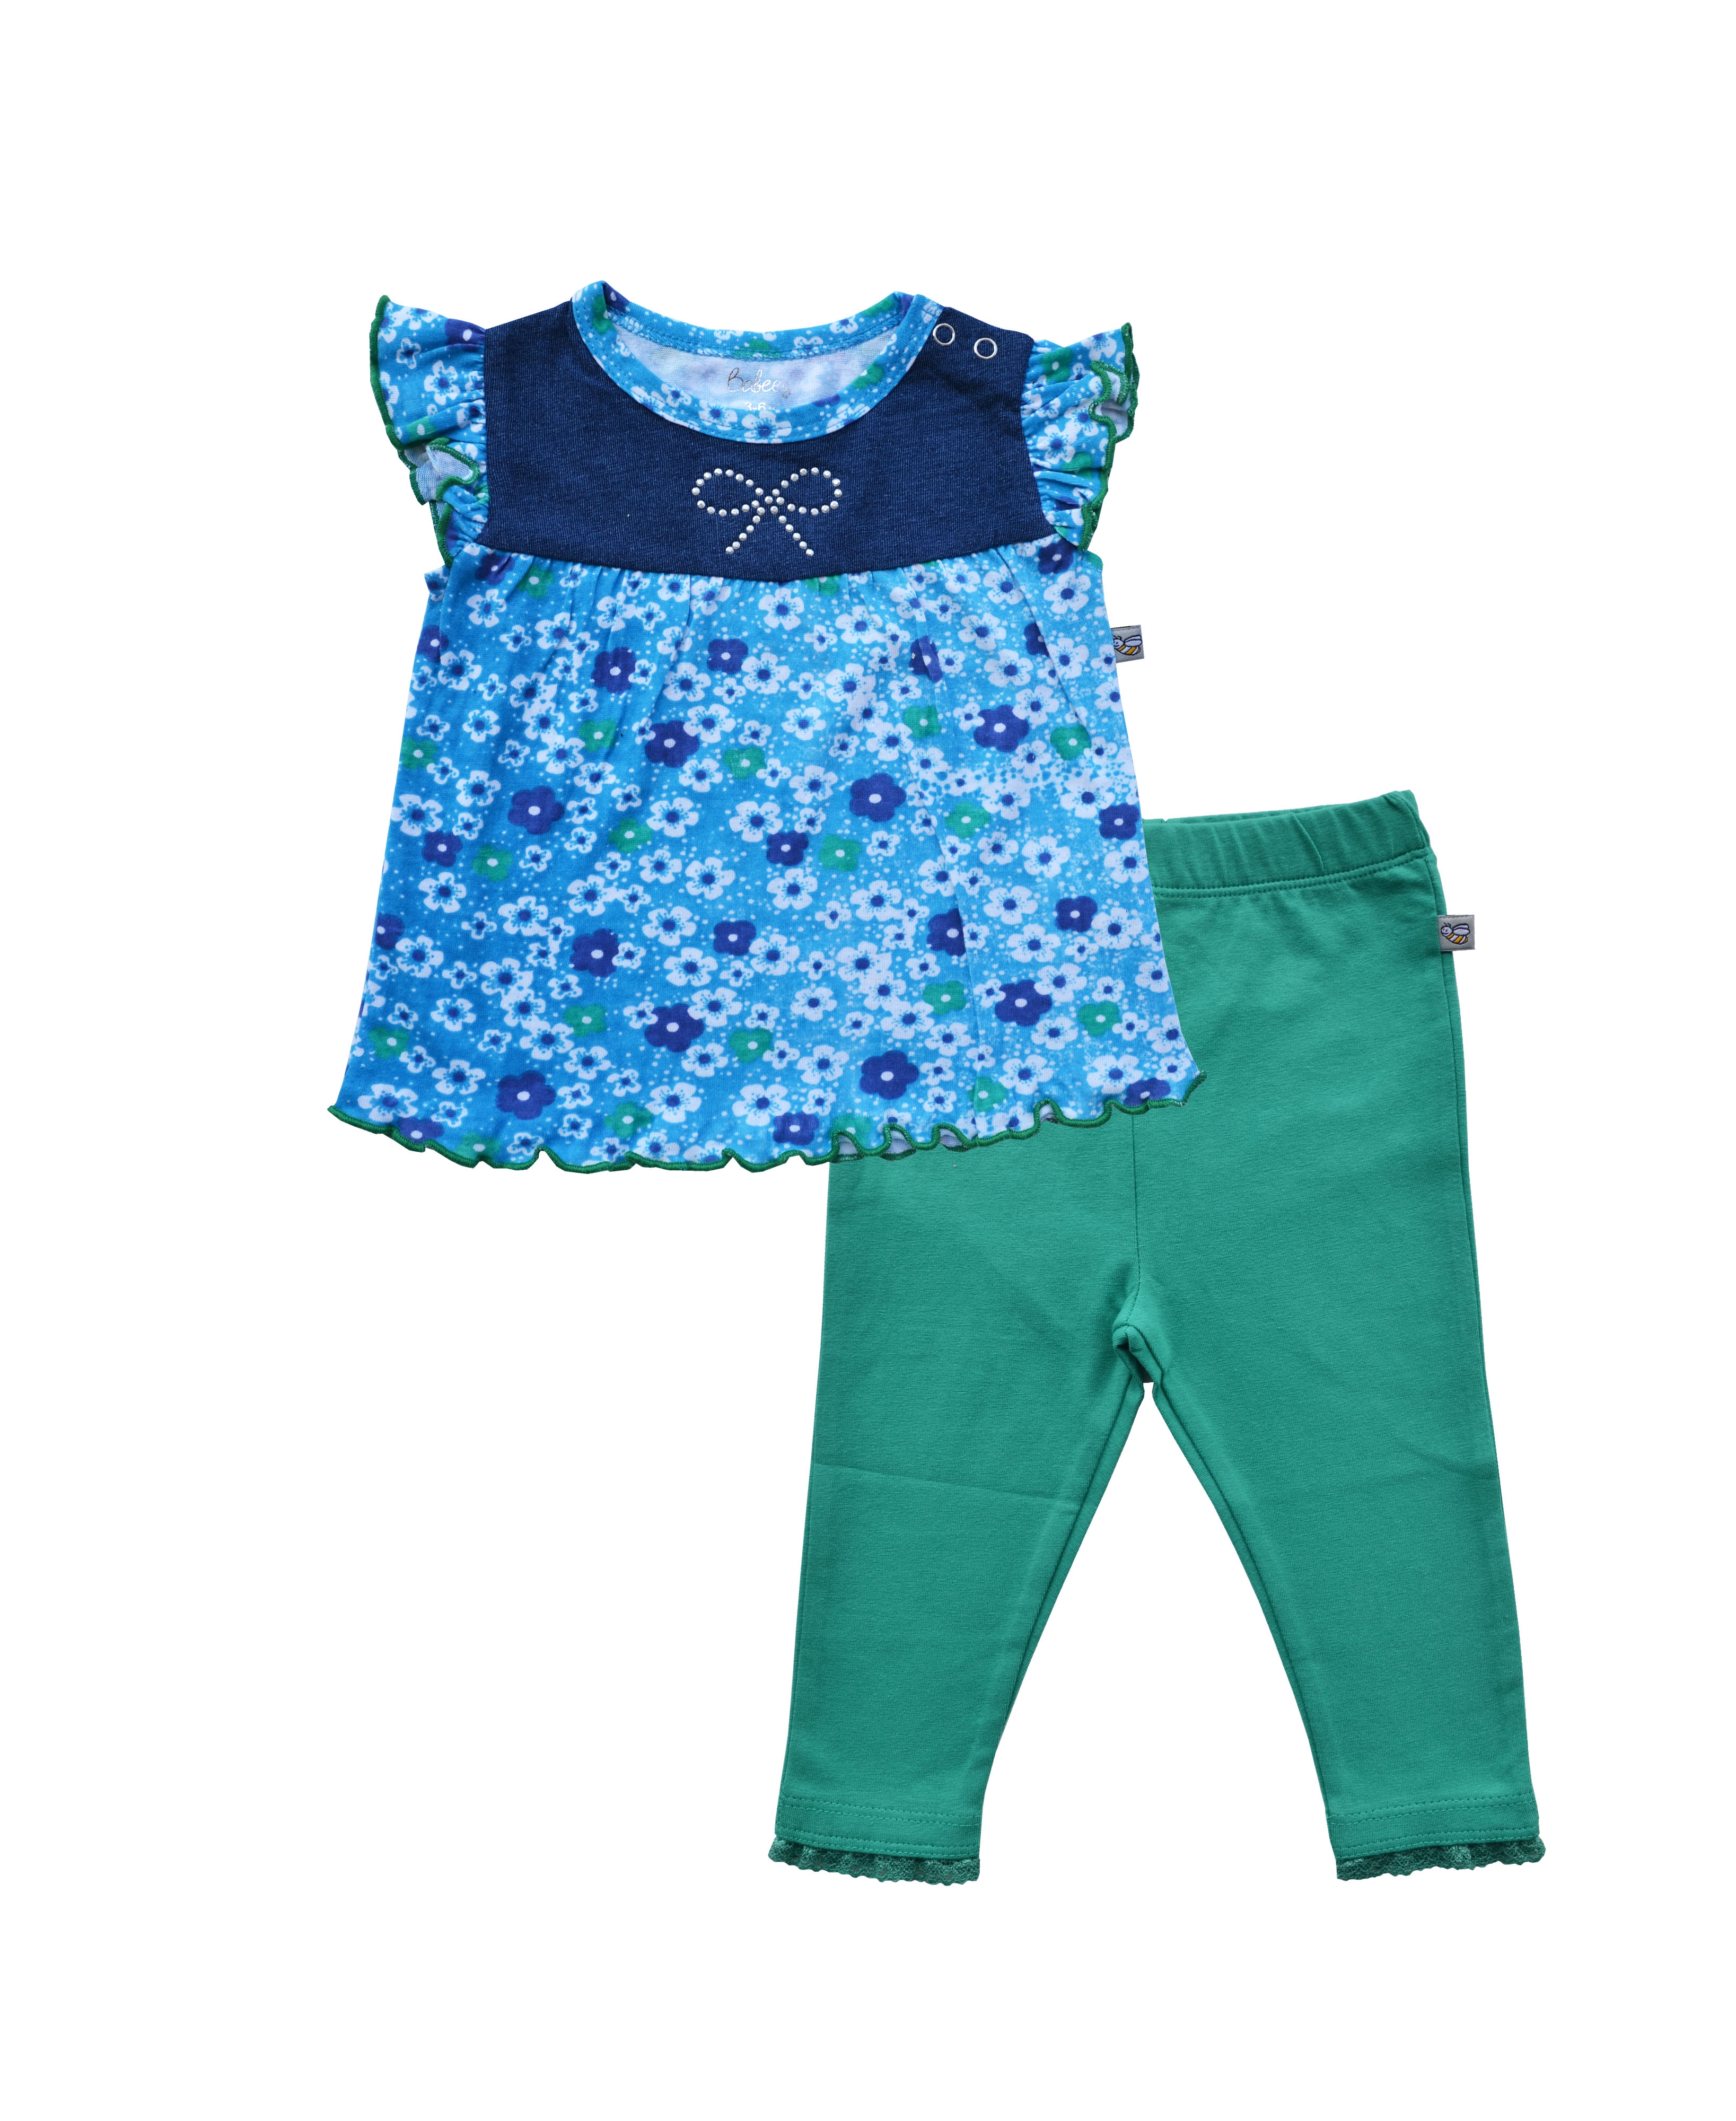 Babeez | Allover Flower Print on Blue Top and Dark Green Solid Leggings (100% Cotton Jersey) undefined